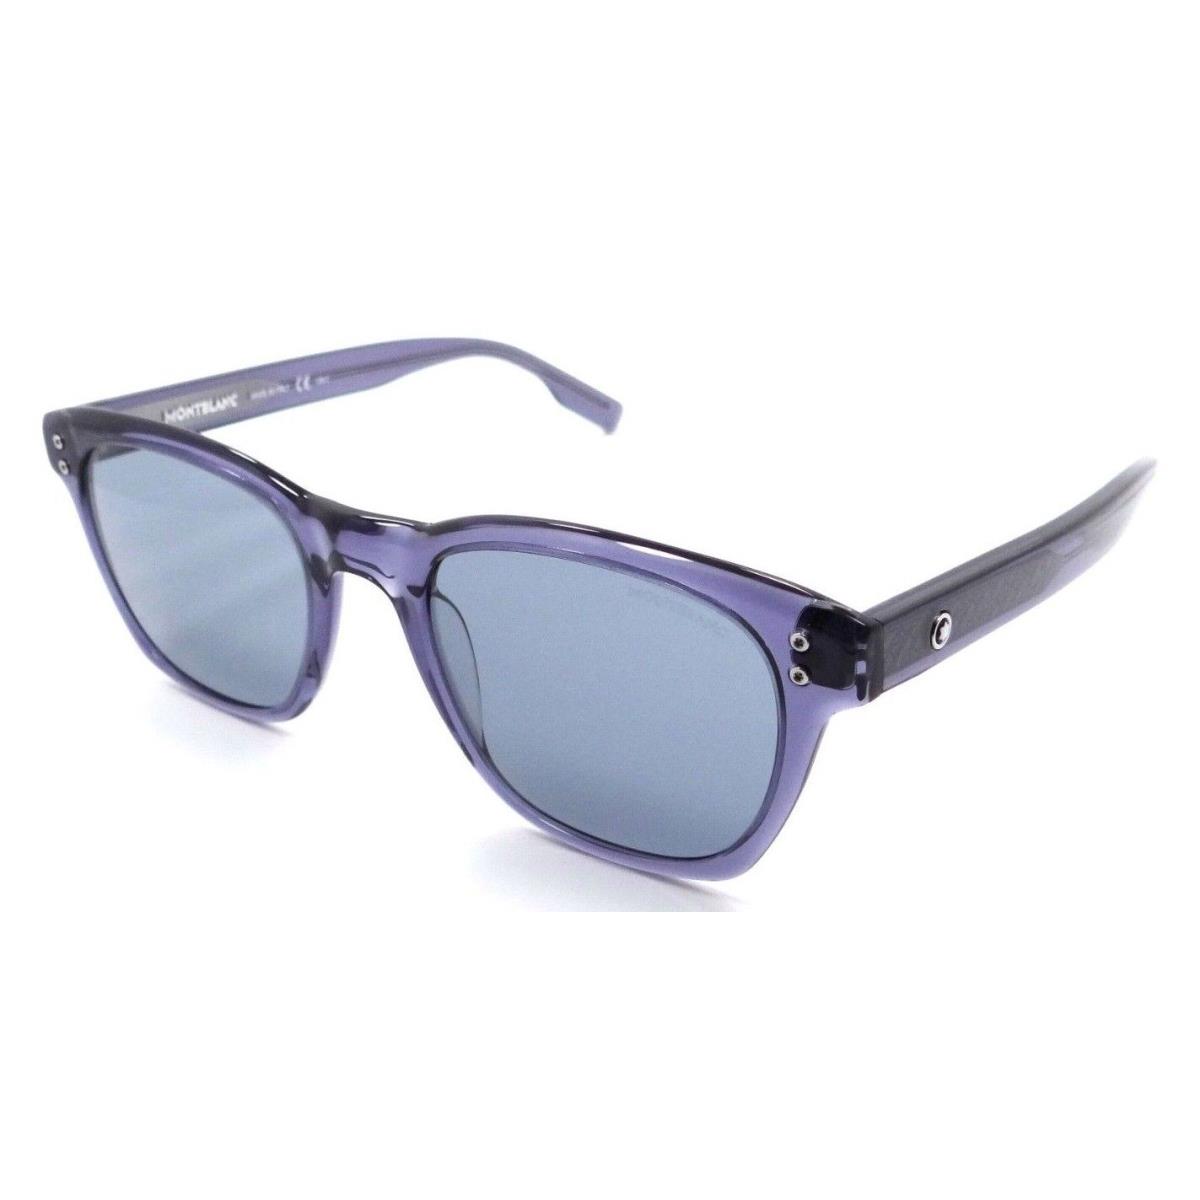 Montblanc Sunglasses MB0122S 004 51-20-155 Blue / Grey Made in Italy